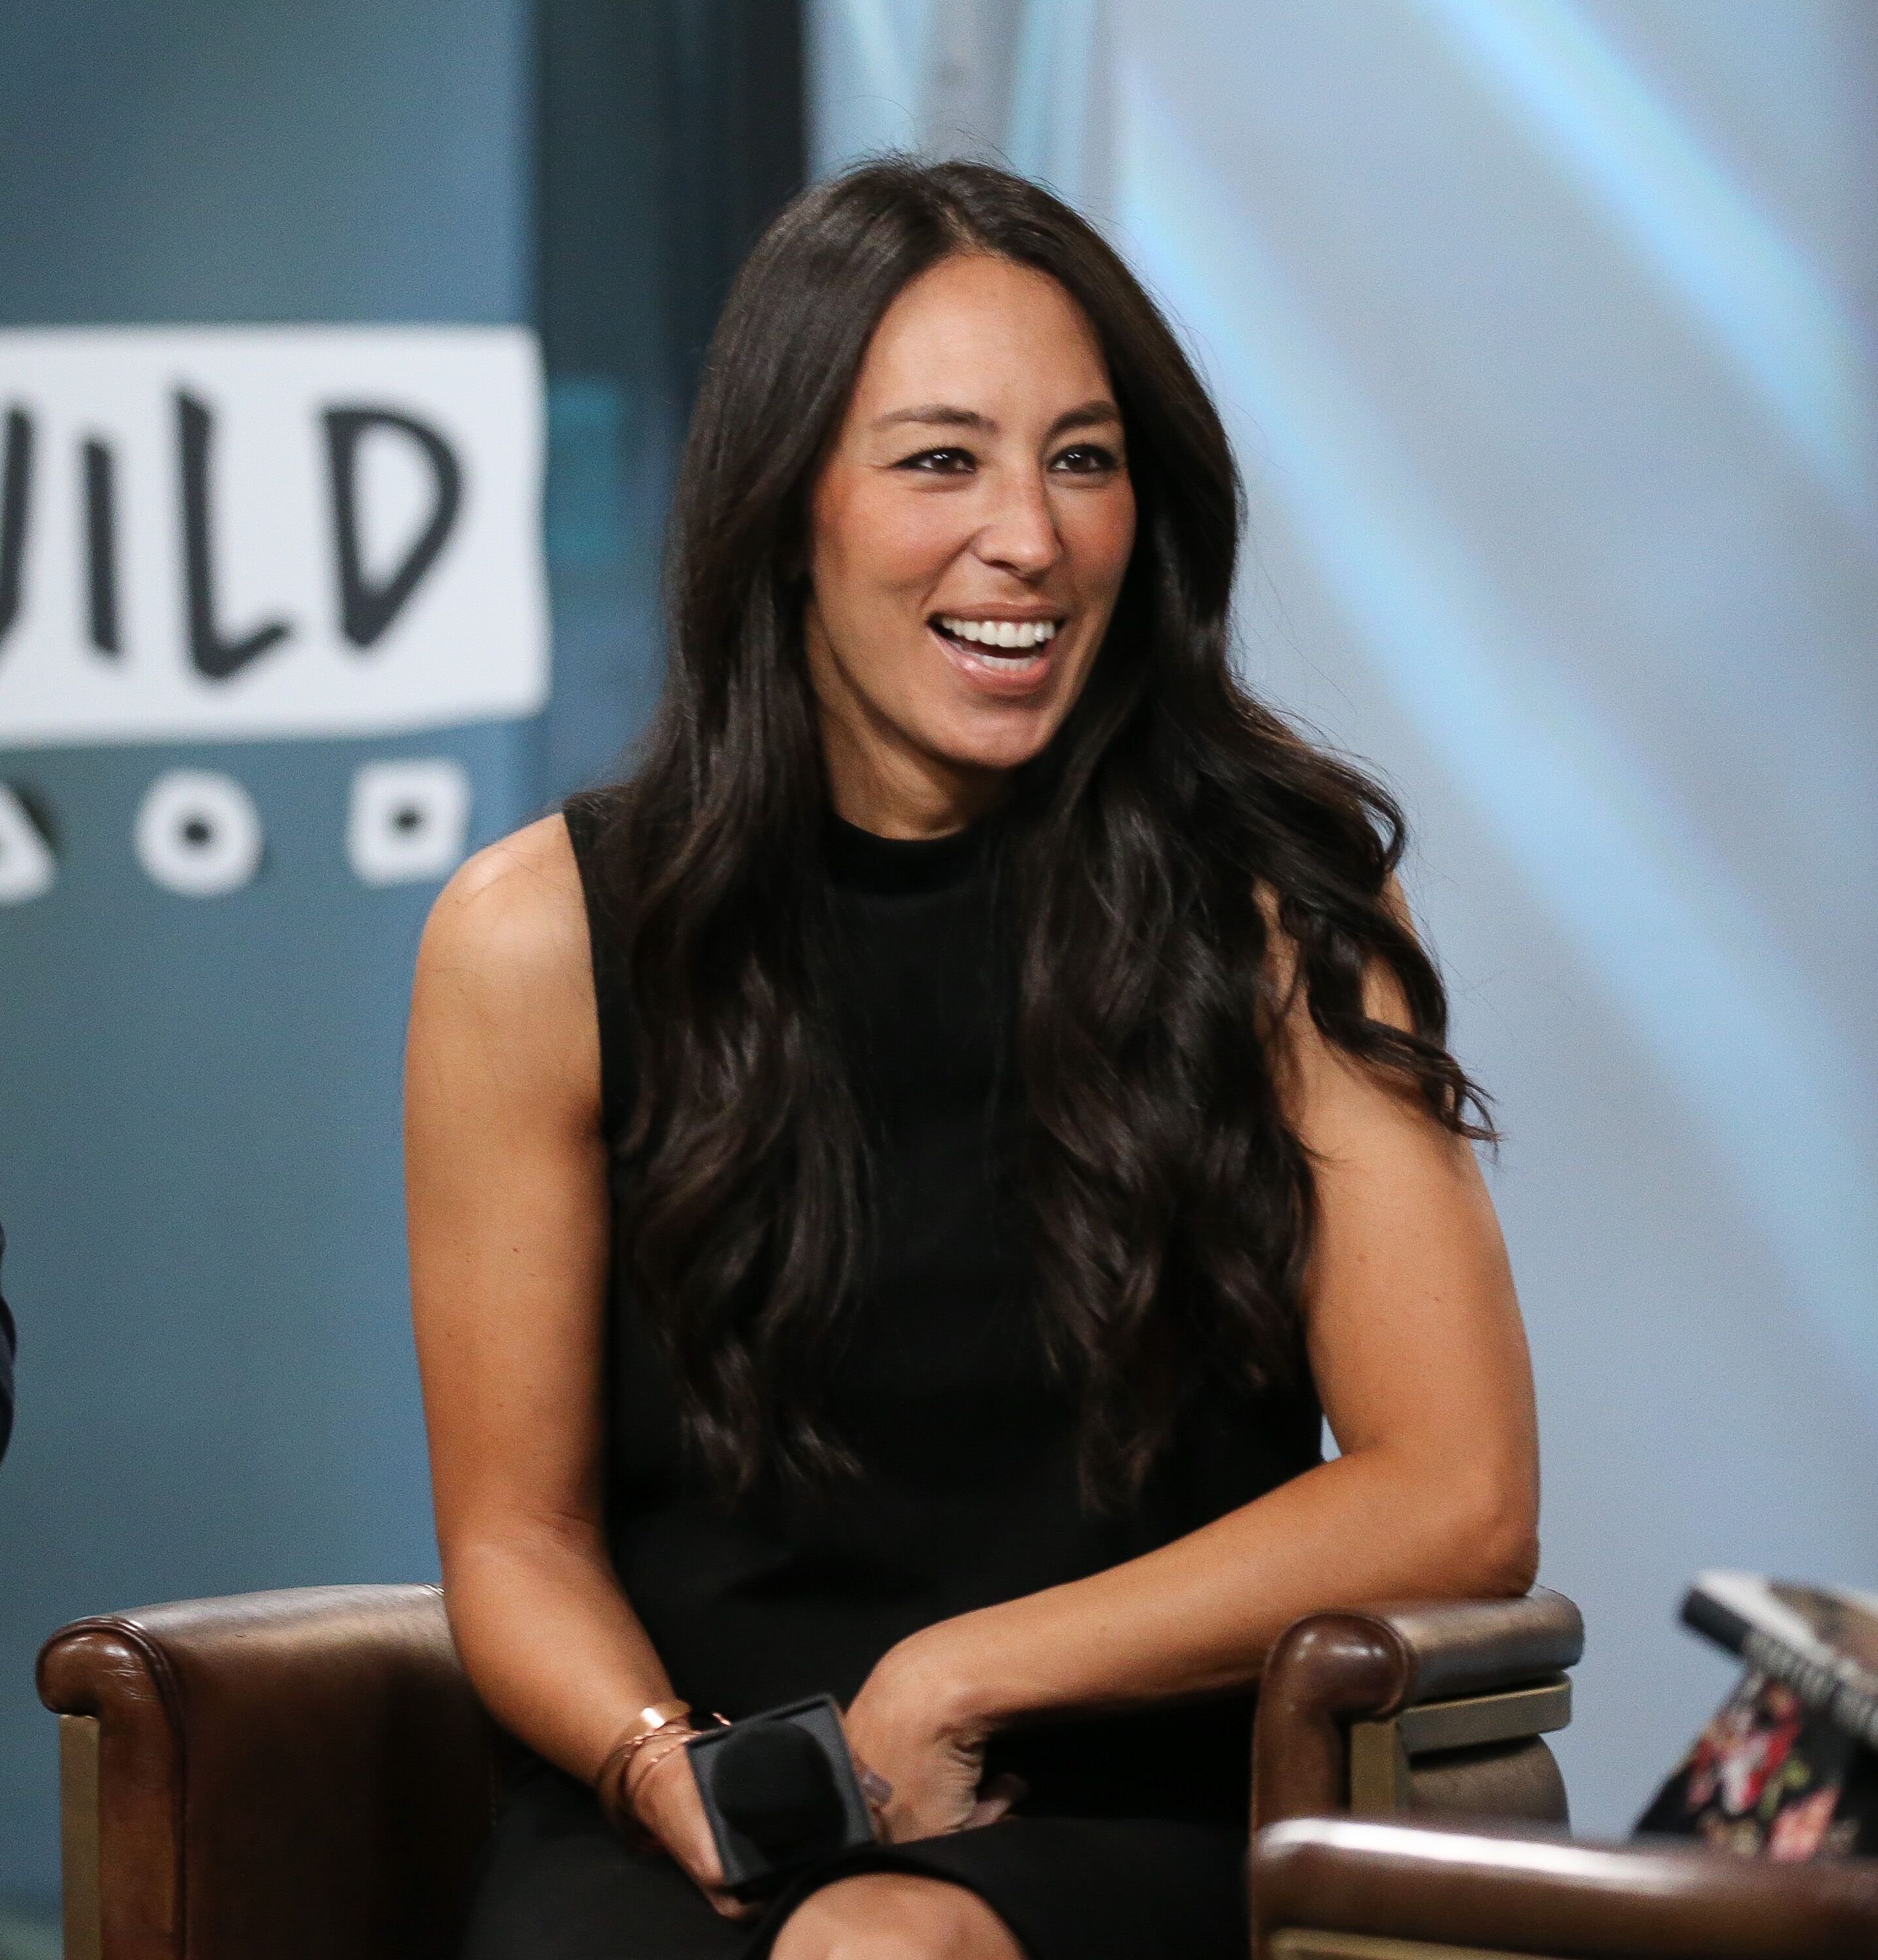  Joanna Gaines discusses new book, "Capital Gaines: Smart Things I Learned Doing Stupid Stuff" at Build Studio | Getty Images